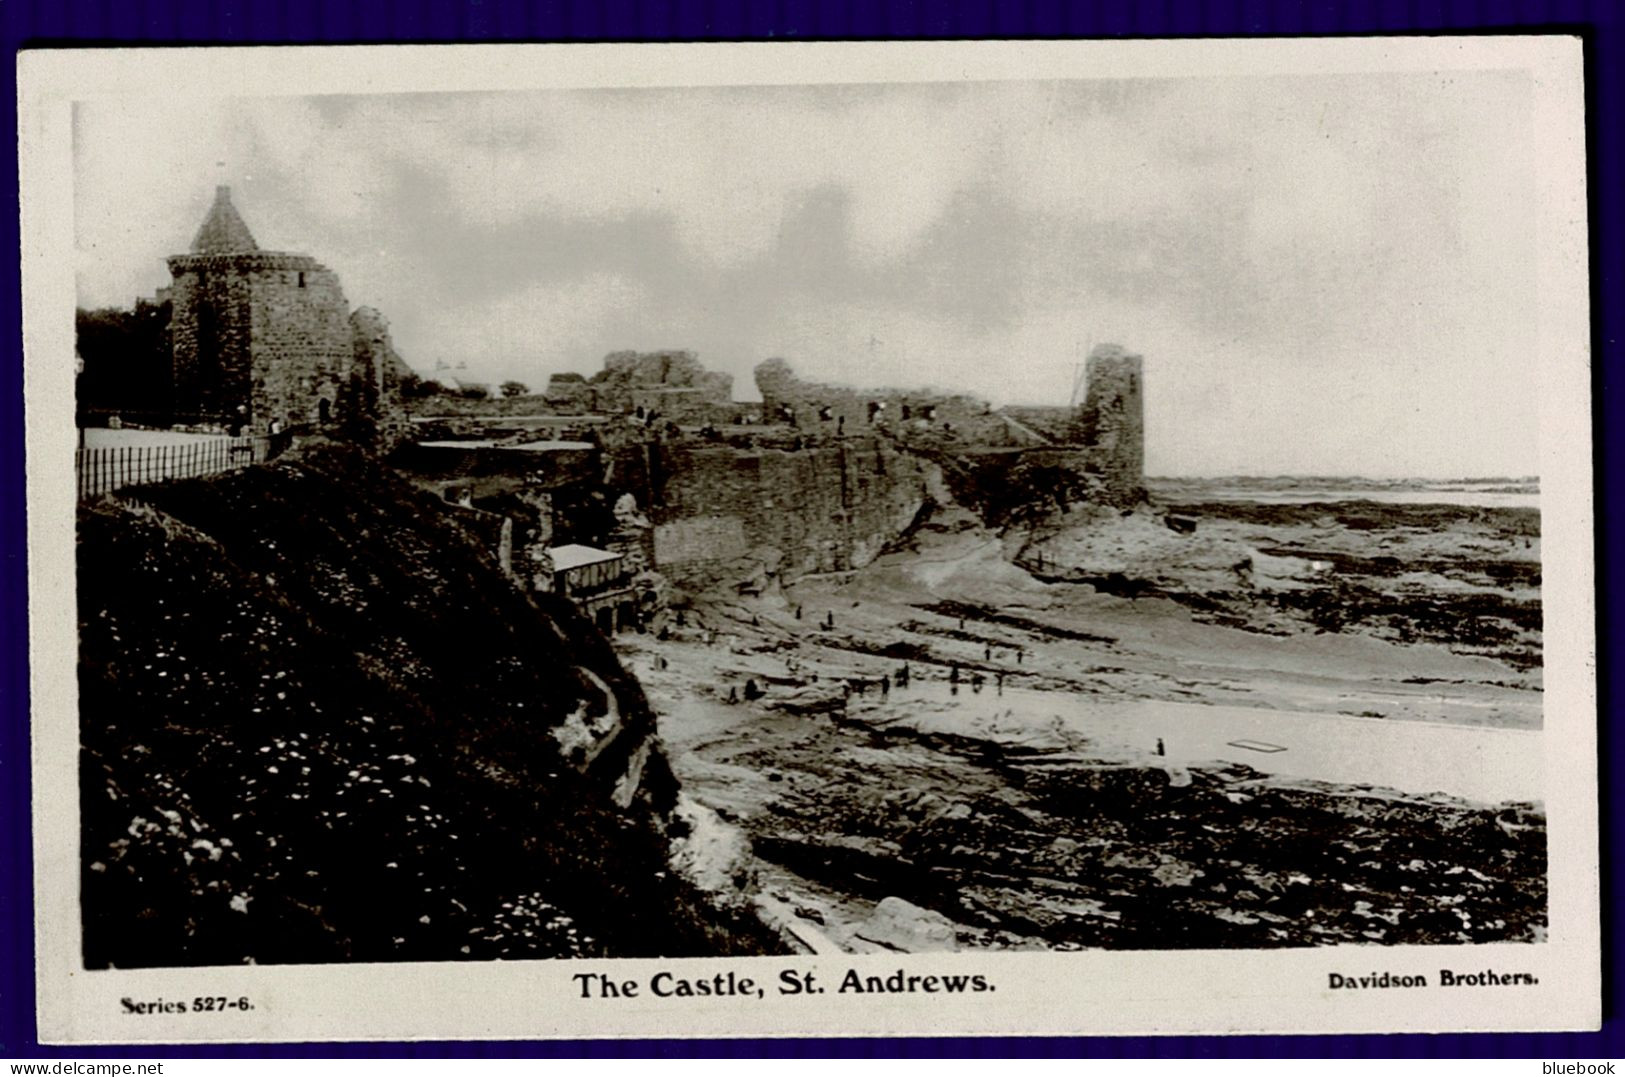 Ref 1641 - Early Real Photo Postcard - The Castle St. Andrews - Fife Scotland - Fife